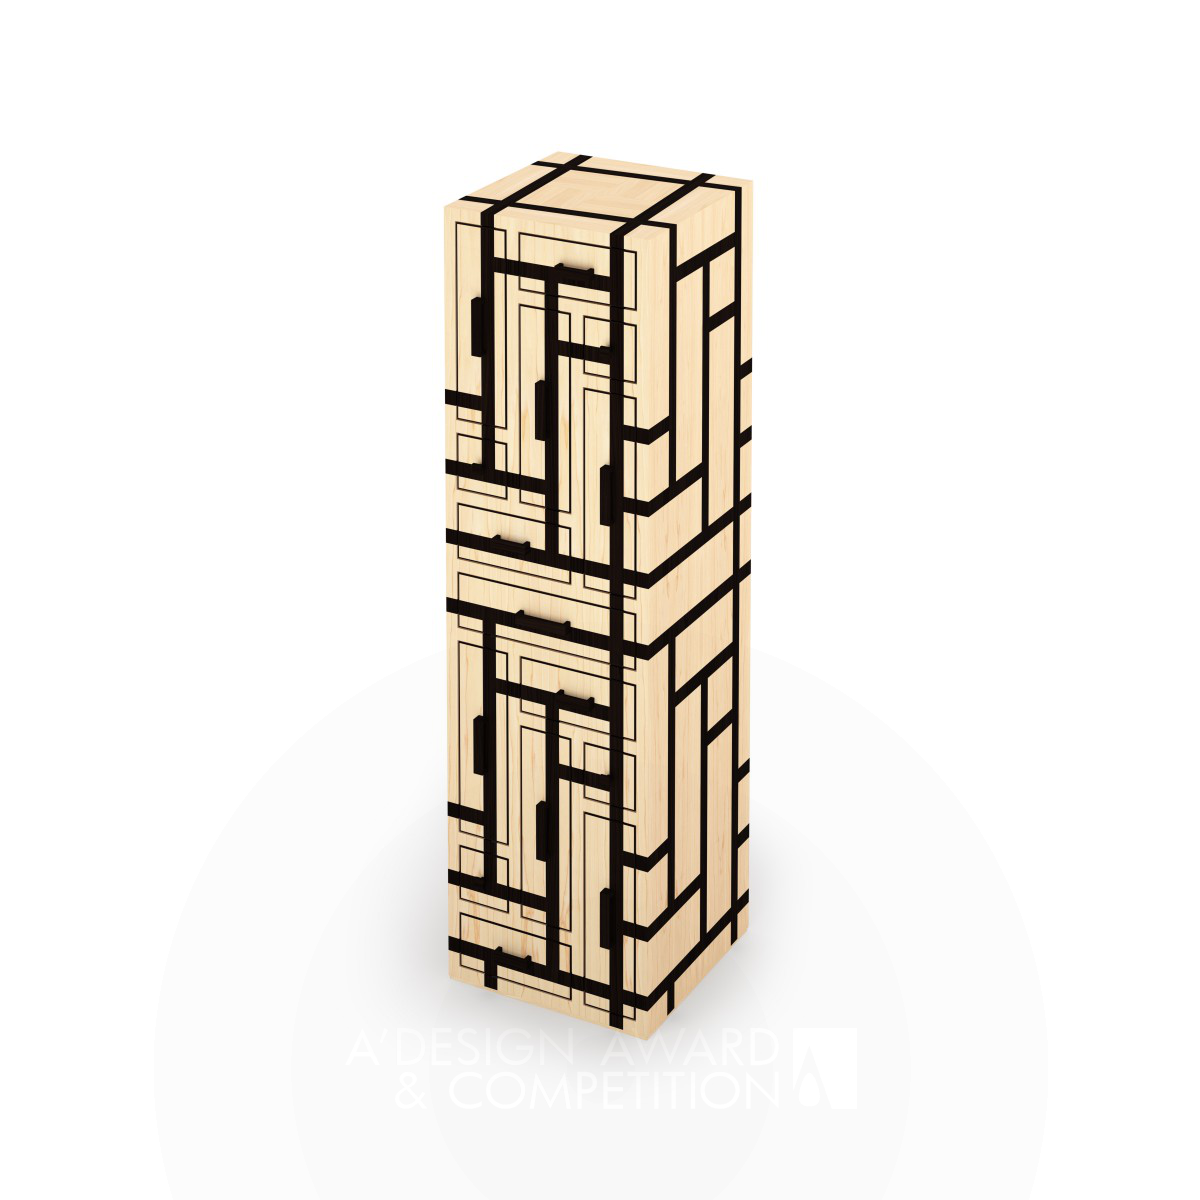 Labyrinth Chest of drawers by Eckhard Beger